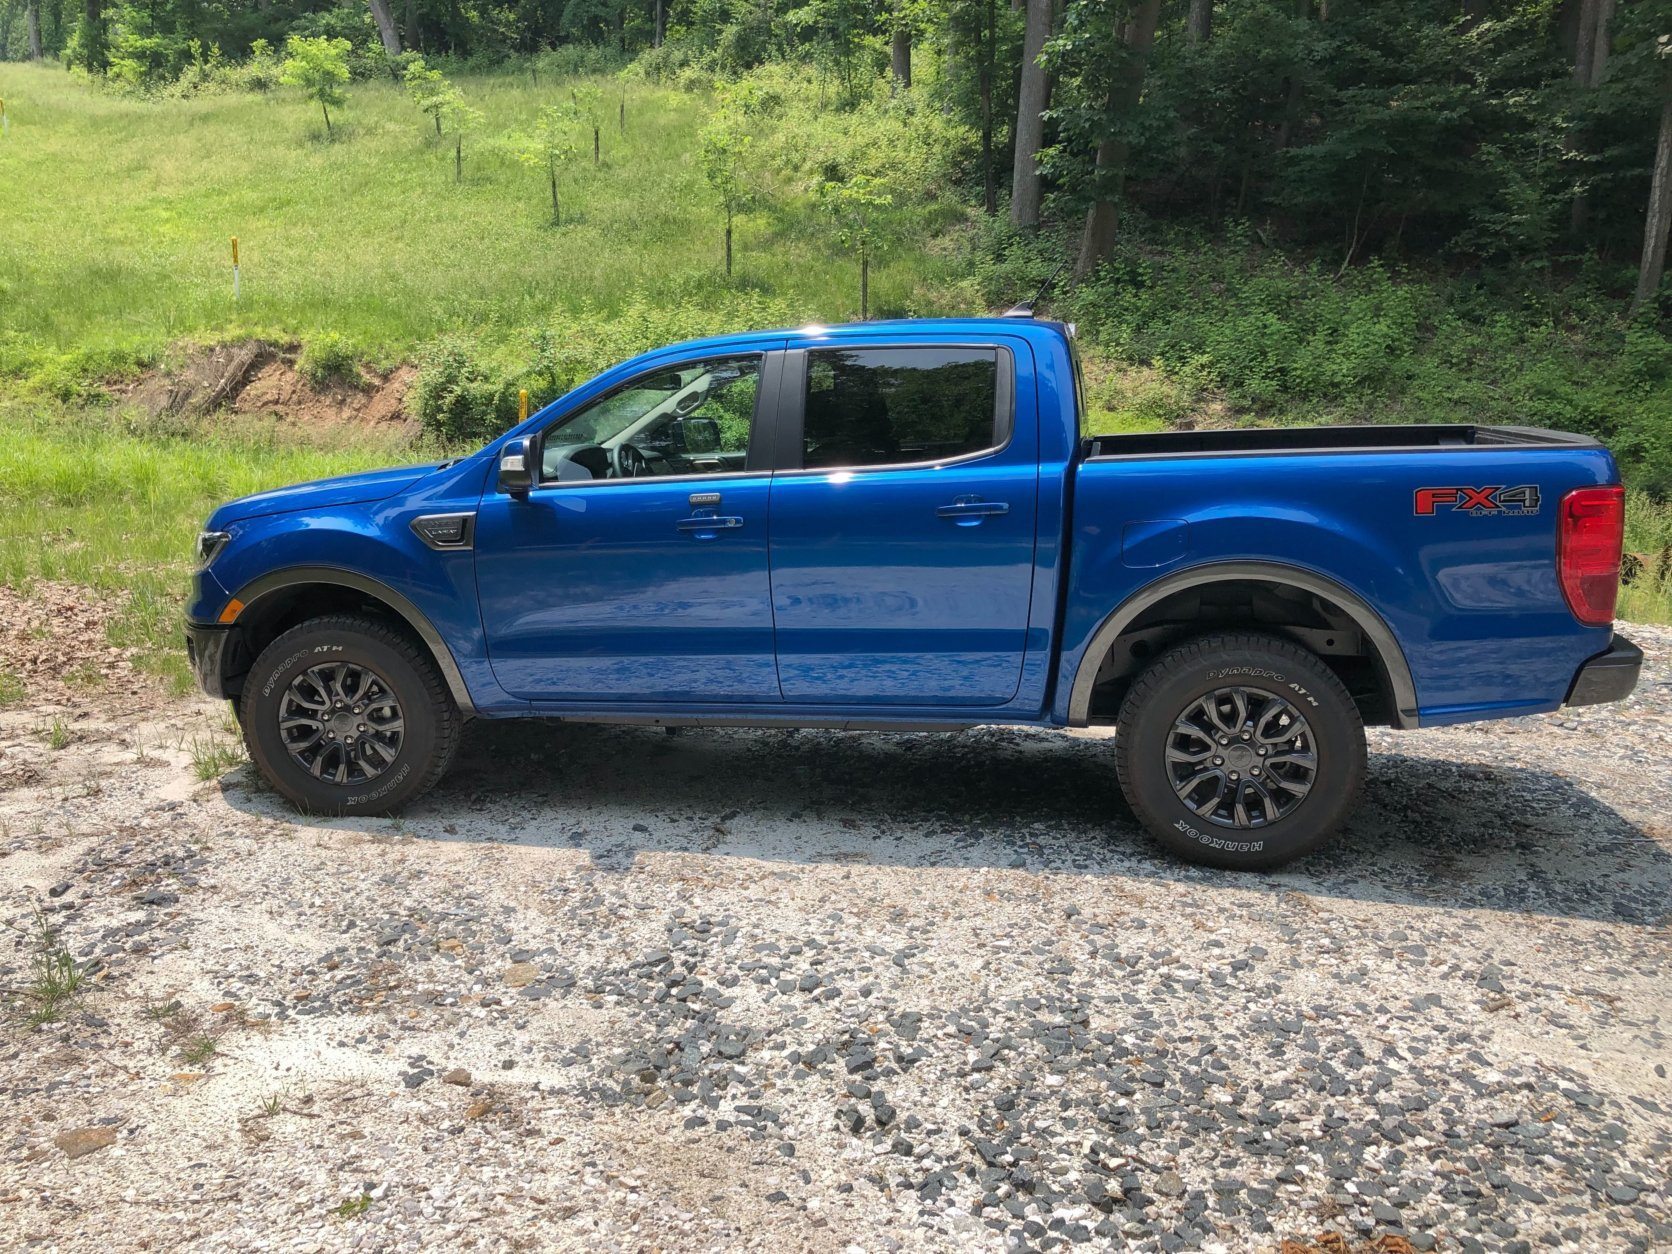 <p>Most will come with a four-door Super Crew cab and a five-foot bed. My test ride was the loaded $38,385 Lariat trim level with another $1,295 FX4 off road package added. It sports beefy wheels and tires with pretty aggressive tread for a street tire.</p>
<p>The Ford Ranger comes with just one engine and transmission, a 2.3L EcoBoost four banger and a 10-speed automatic. They work well together and provide good performance, but turbo four isn’t as smooth as V6 engines in some of the other small trucks we’ll be looking at soon. I noticed a bit of turbo lag as well, but once you get going the power is snappy and the truck keeps up with traffic easily.</p>
<p>&nbsp;</p>
